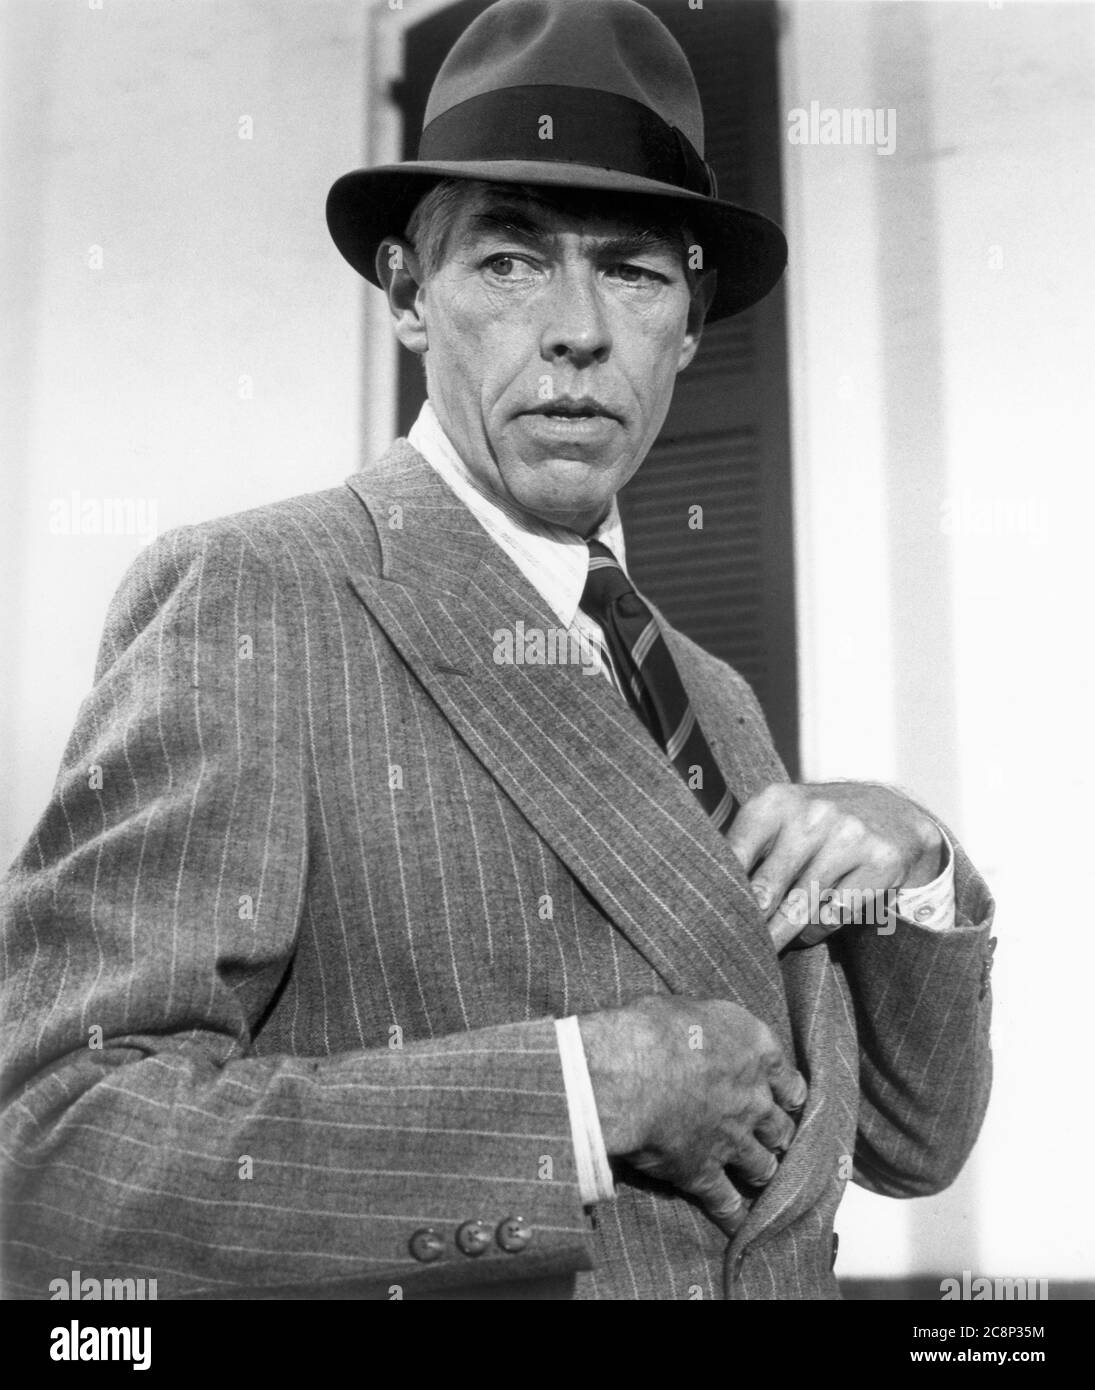 James Coburn Half Length Publicity Portrait For The Film Hard Times Columbia Pictures 1975 Stock Photo Alamy